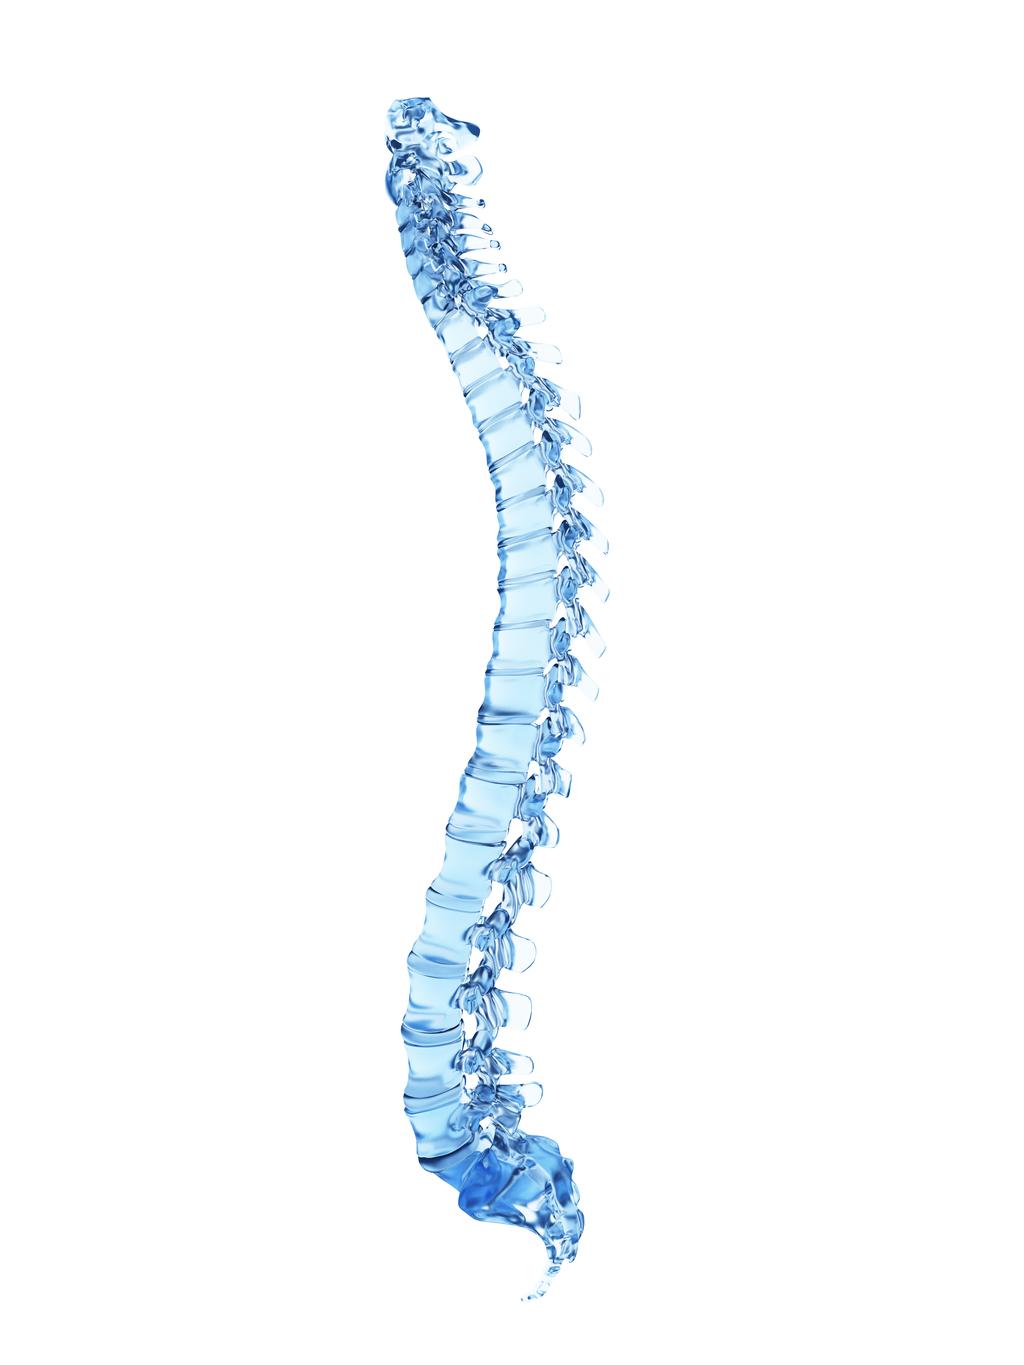 Product Pipeline in Spine Disorders Current diagnostic methods are invasive and expensive Need for diagnostic to determine course of care for better outcomes Need for payers to better determine the